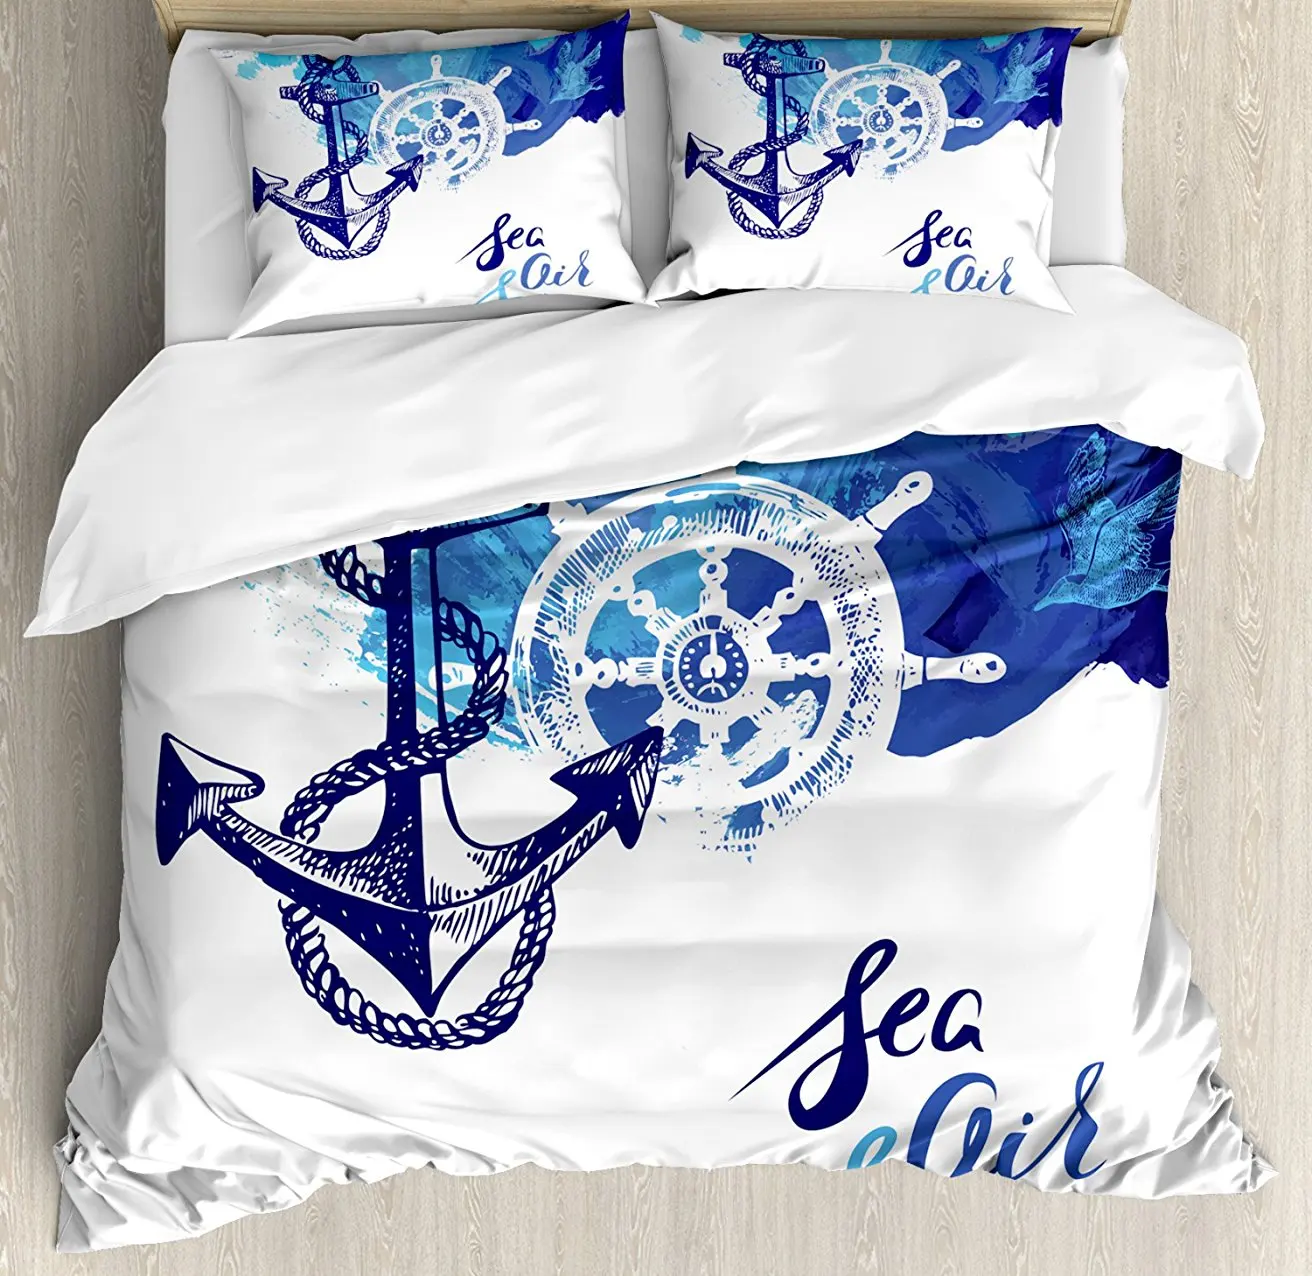 

Nautical Decor Duvet Cover Set Vivid Ocean Back with Paint Effects with Wind Rose and Rudder Cruise Image 4 Piece Bedding Set